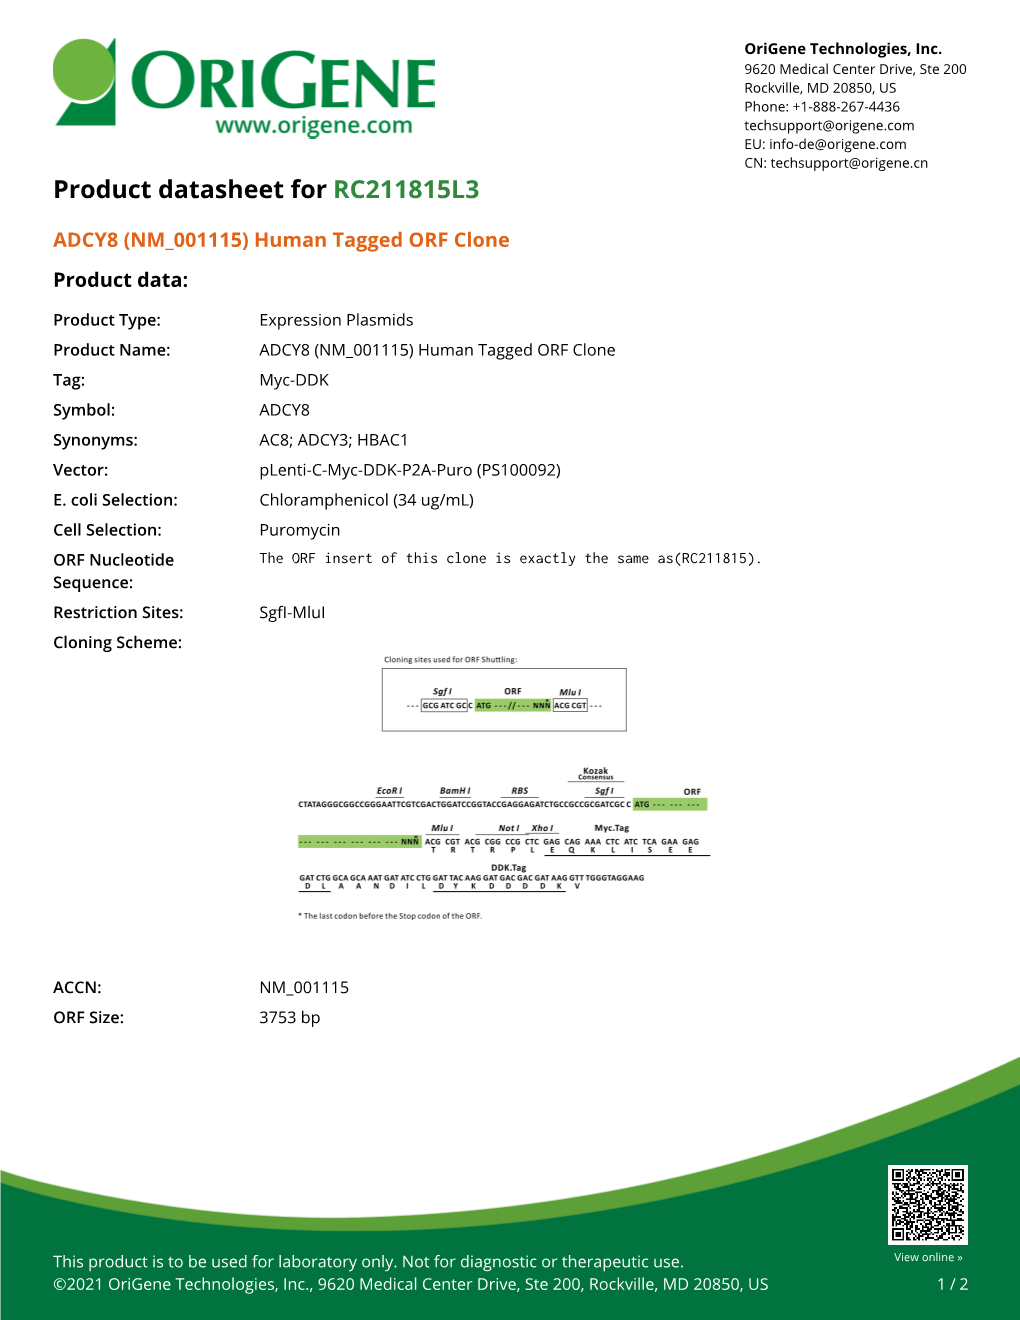 ADCY8 (NM 001115) Human Tagged ORF Clone Product Data